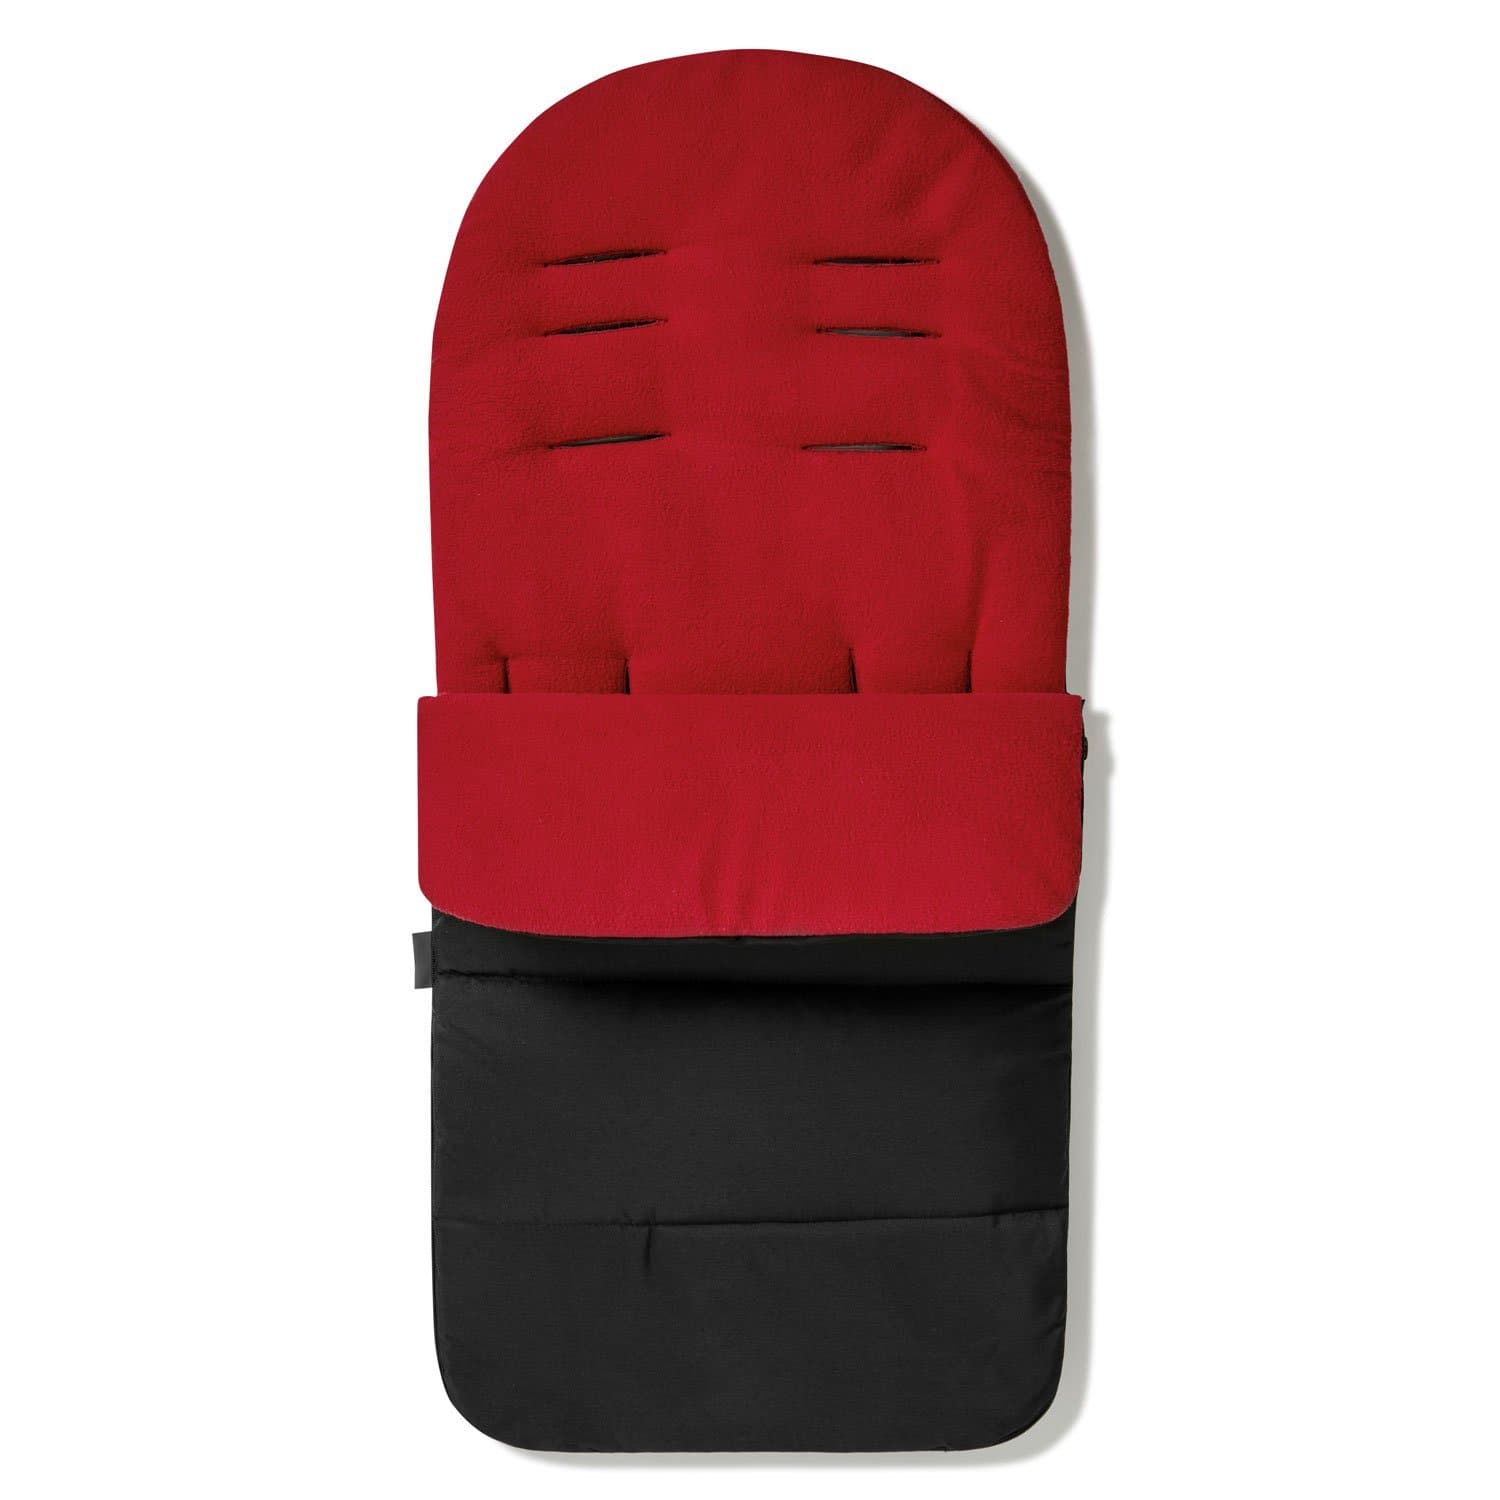 Premium Footmuff / Cosy Toes Compatible with Babyzen - For Your Little One